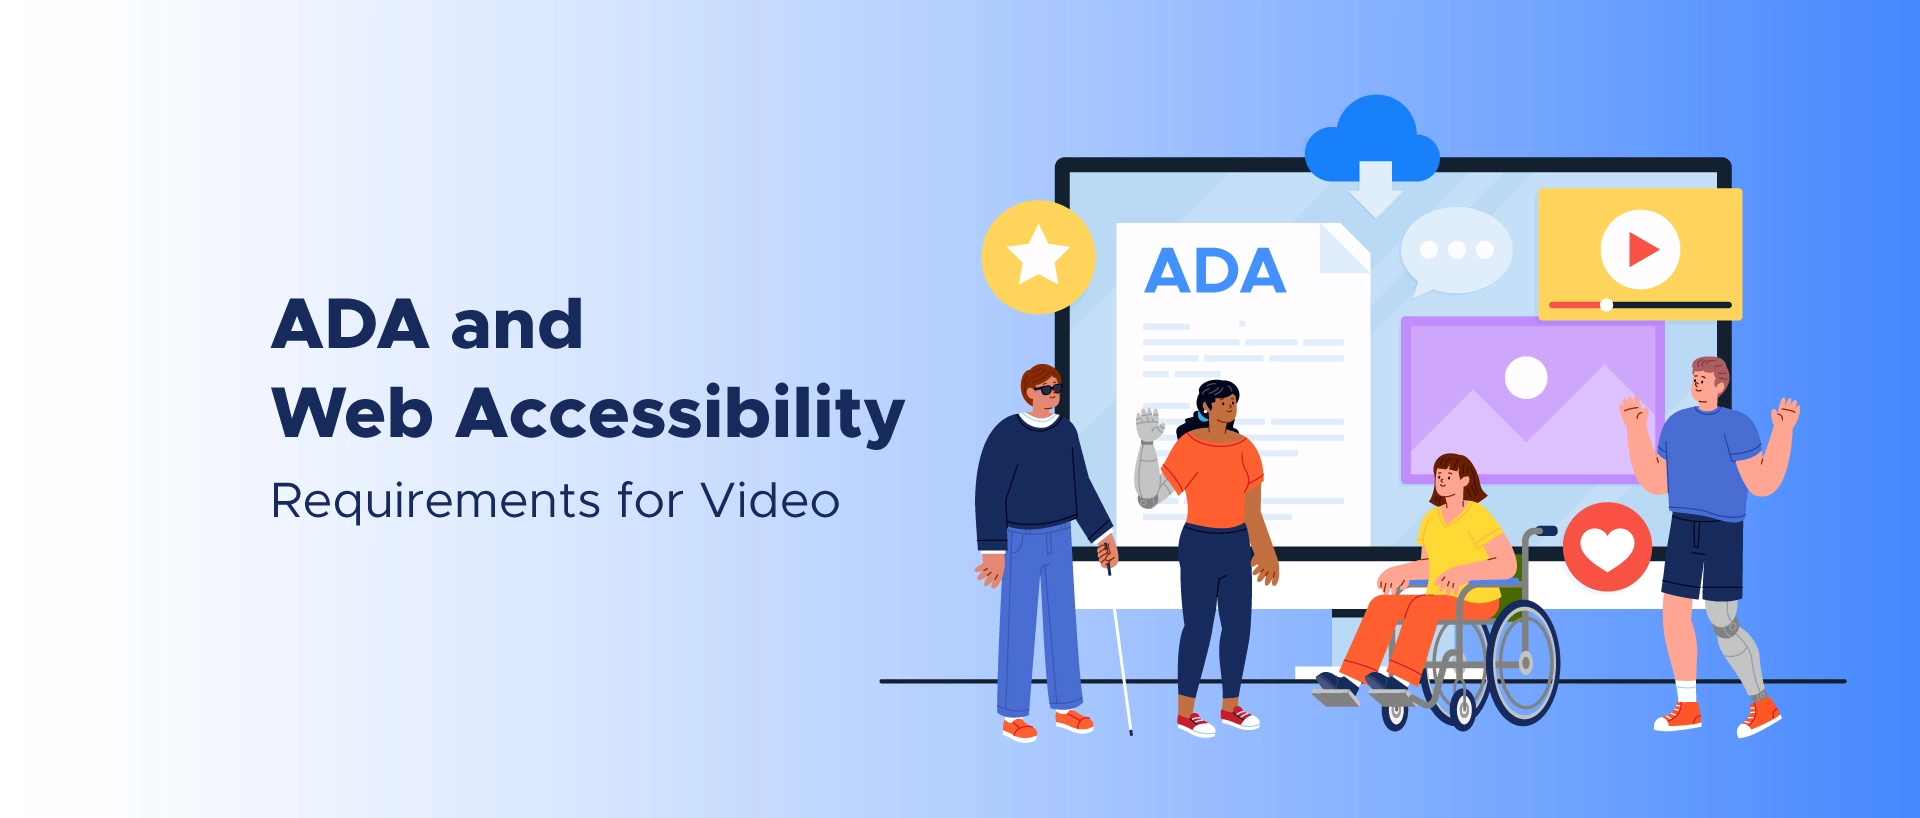 ADA and Its Digital Impact: Paving the Way for Web Accessibility